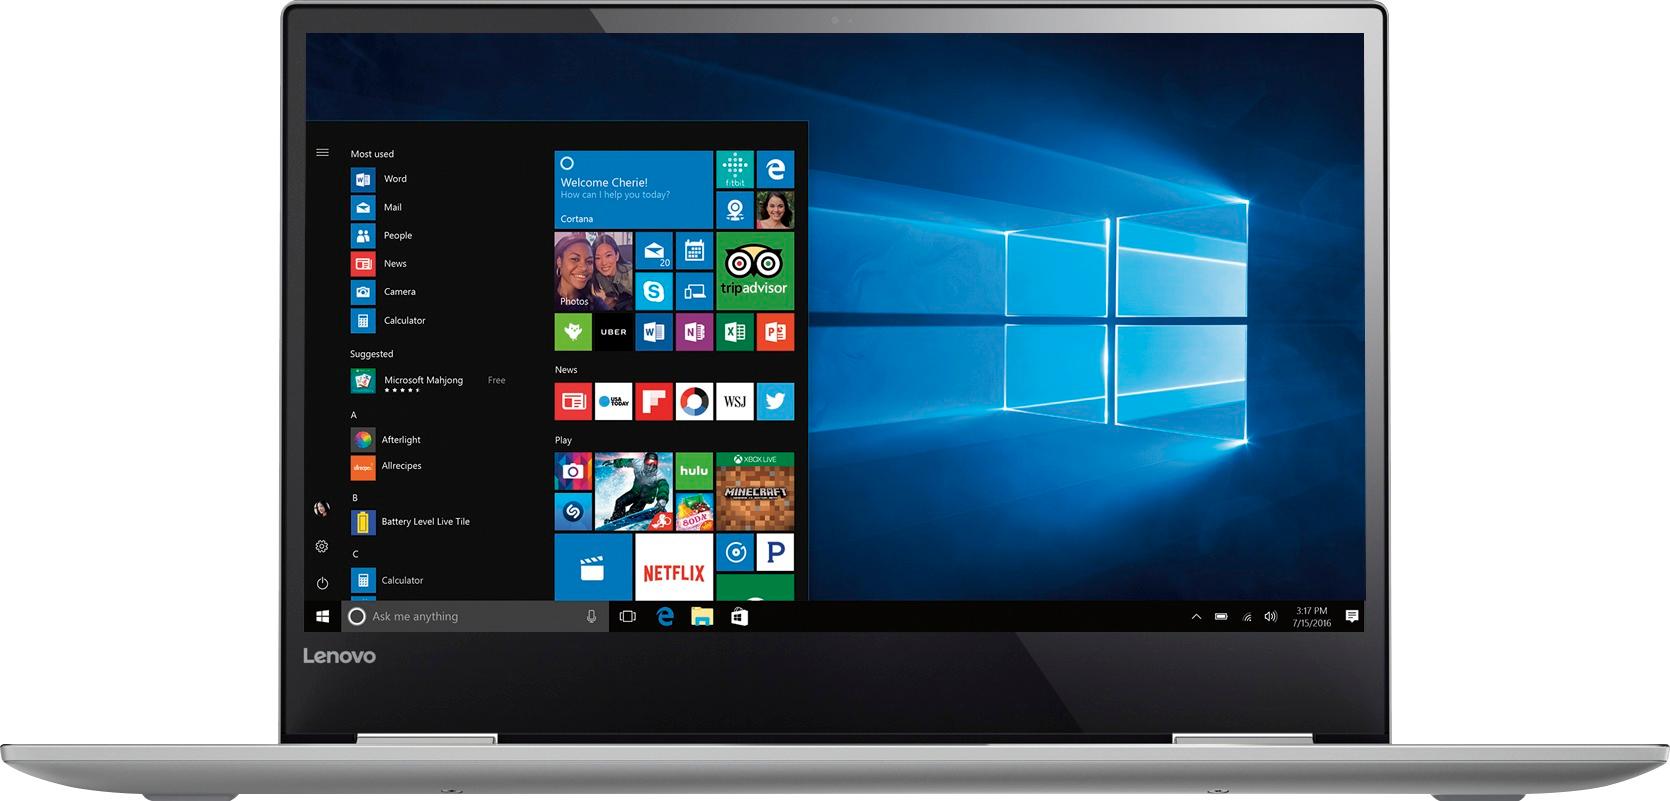 Lenovo Yoga 2-in-1 13.3" Touch-Screen Laptop Core i5 8GB Memory 256GB Solid State Drive Platinum Silver 80X6002JUS - Best Buy